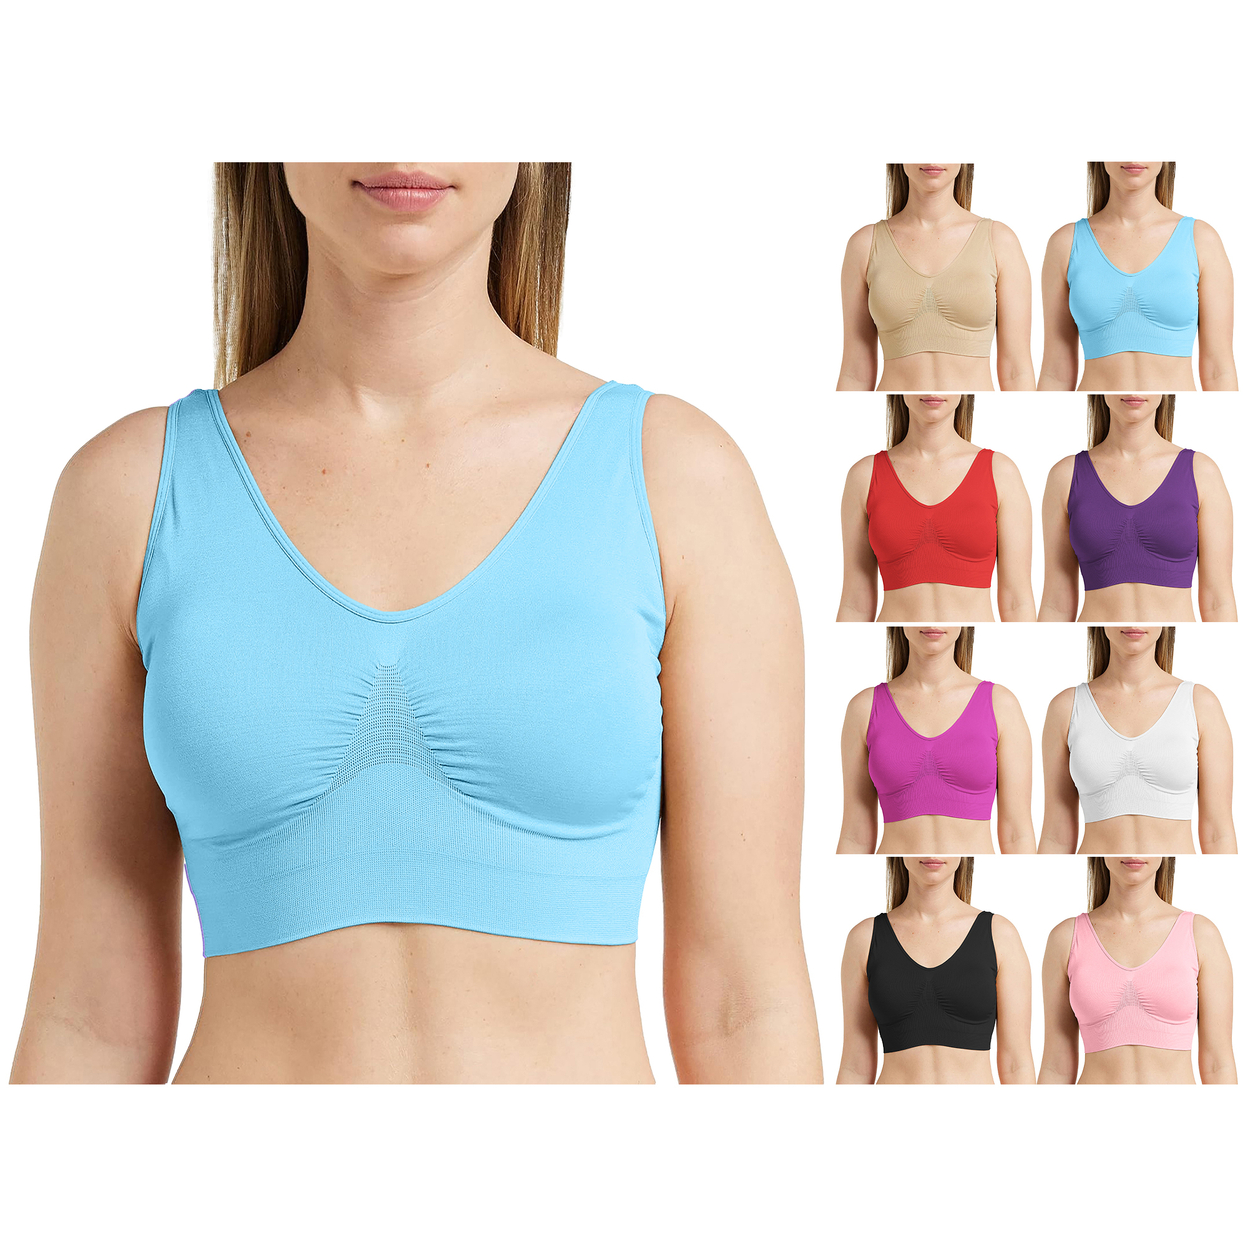 5-Pack: Women's Comfortable Scoopneck Stretch Seamless Yoga Workout Active Bra - Small